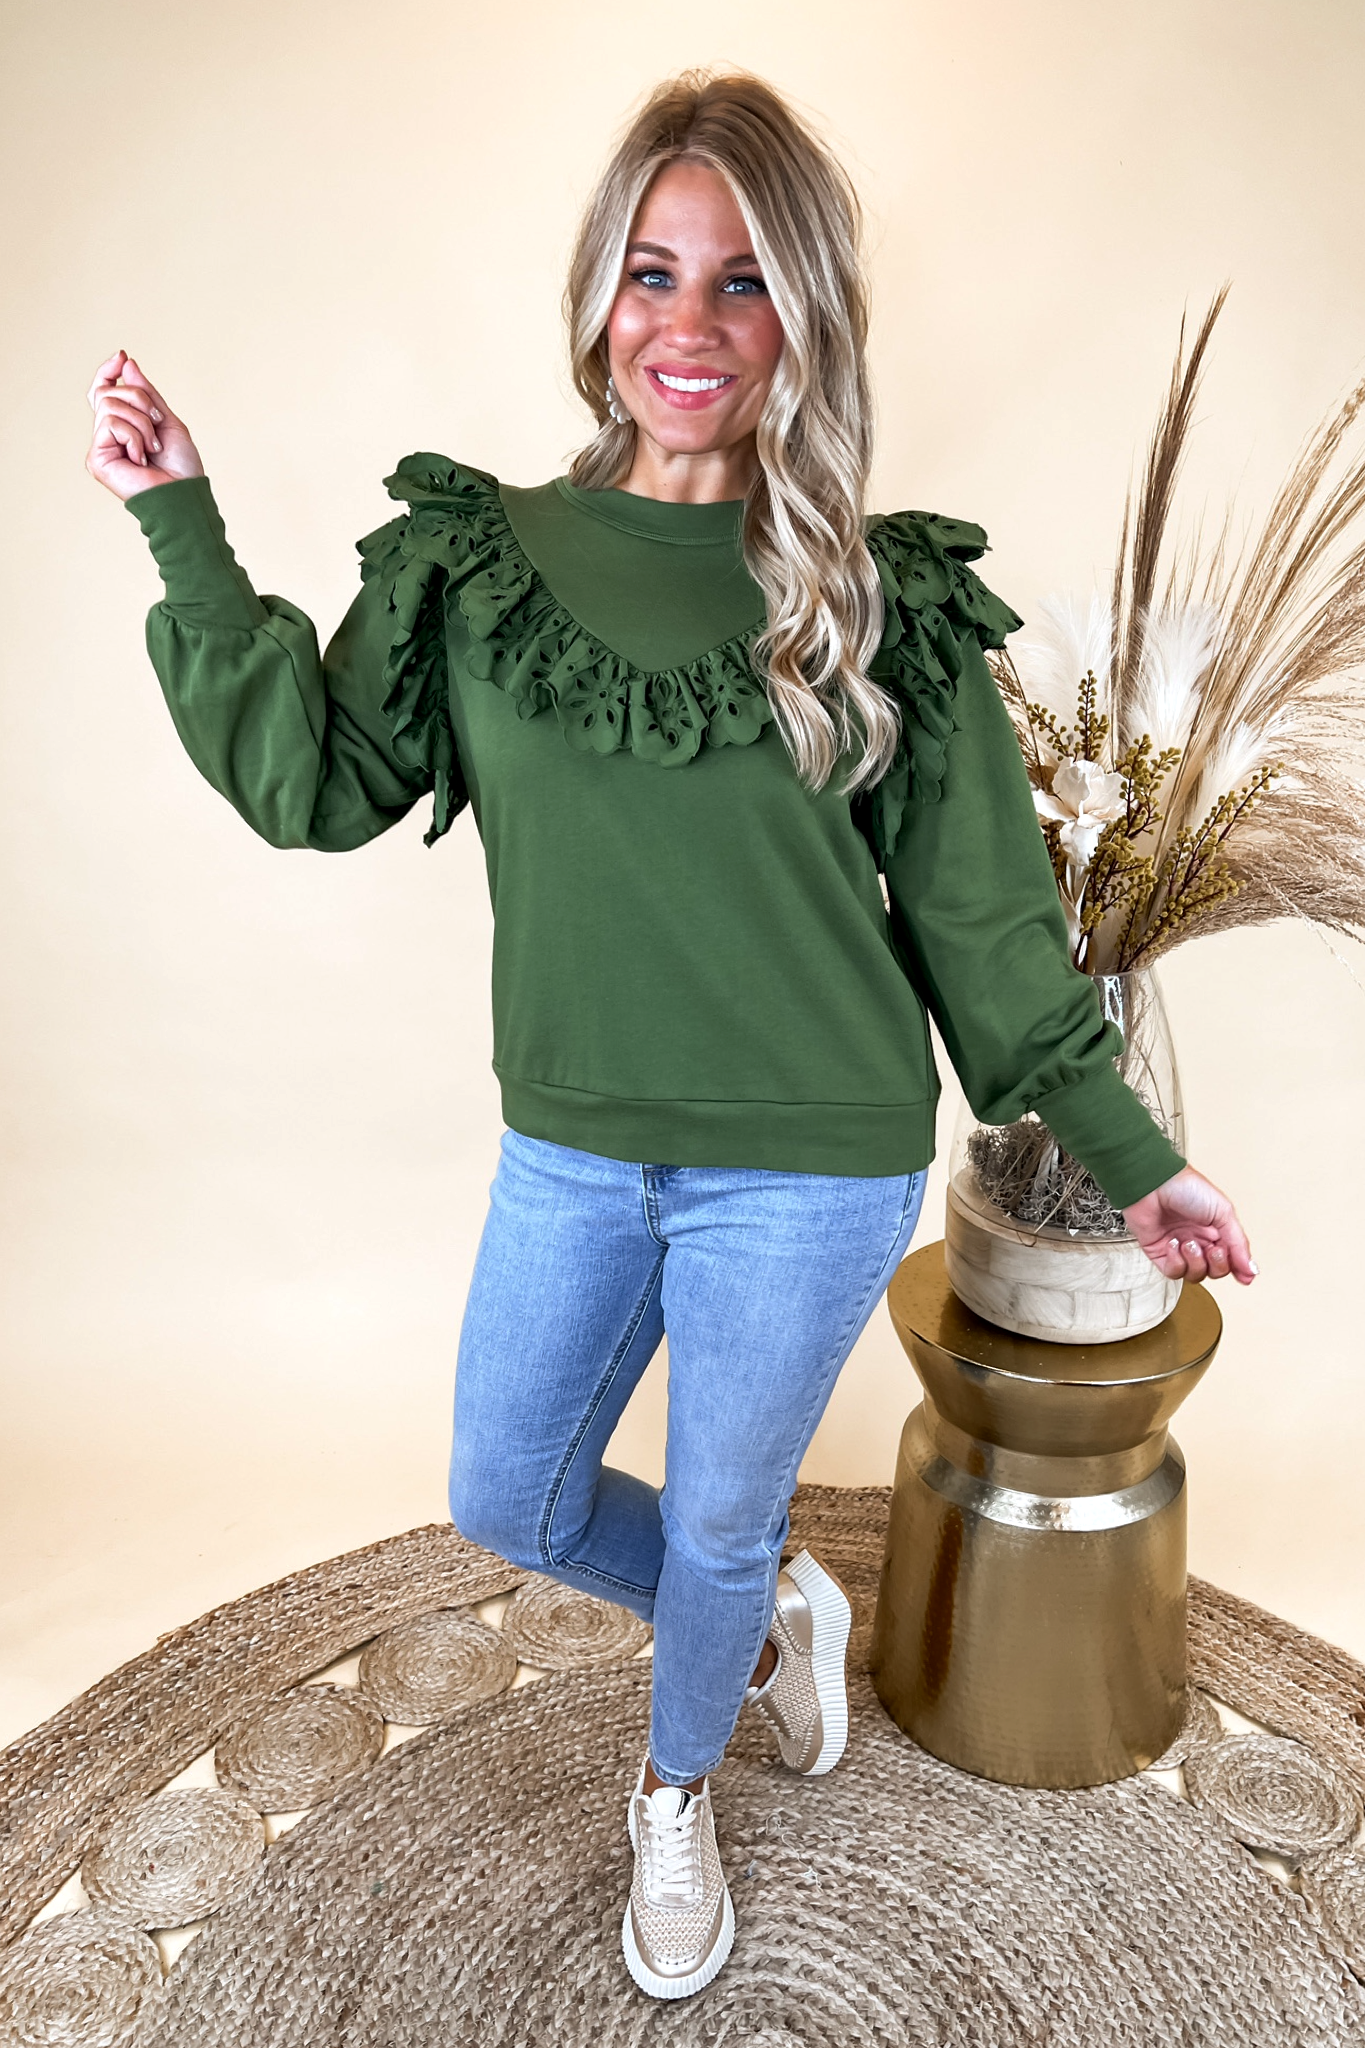 The Ollie Top in Moss by Crosby